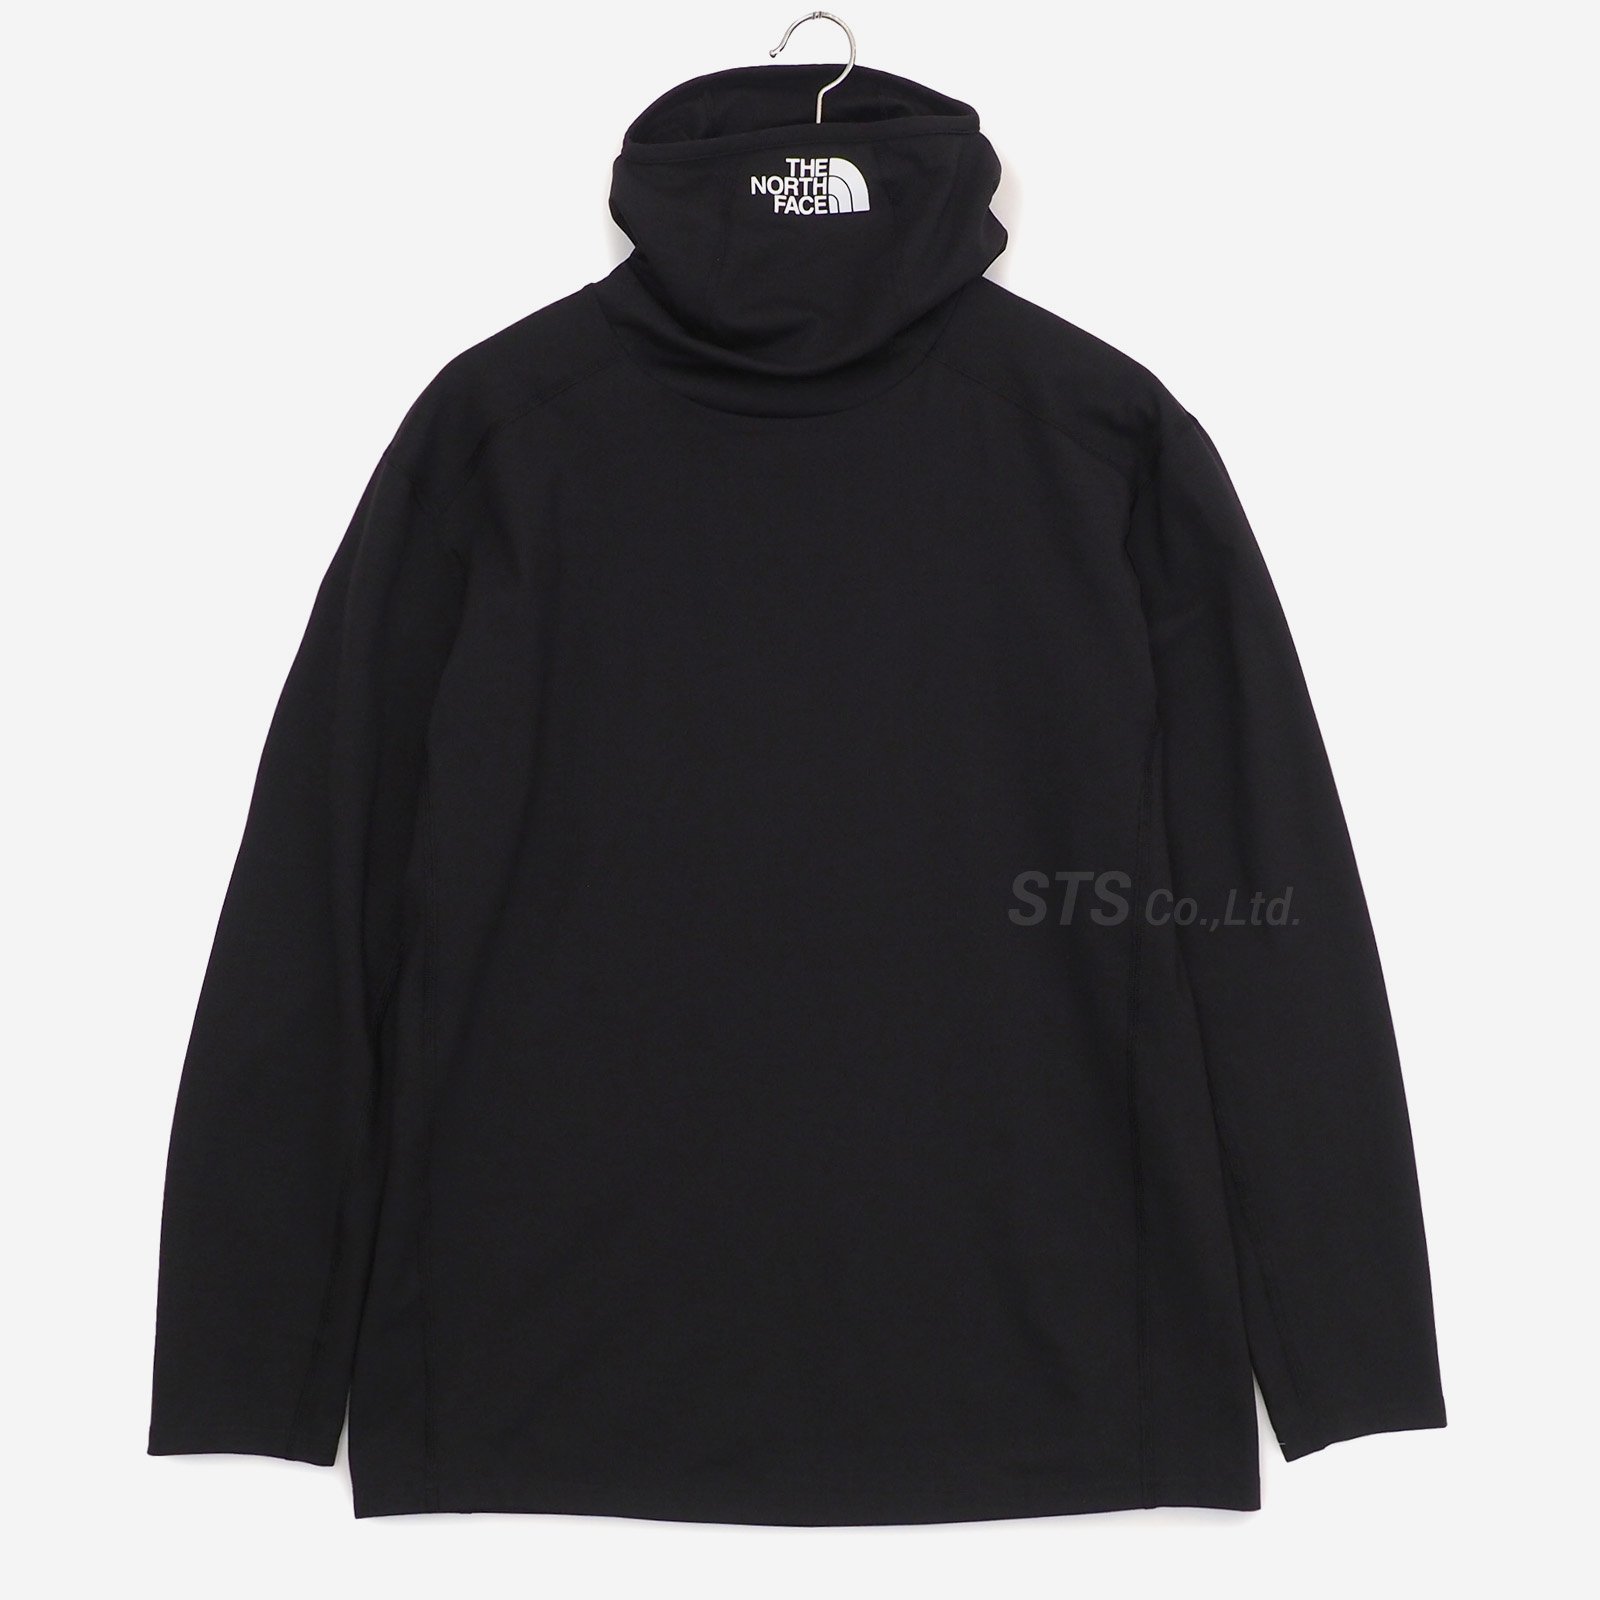 Supreme/The North Face Base Layer L/S Top - ParkSIDER